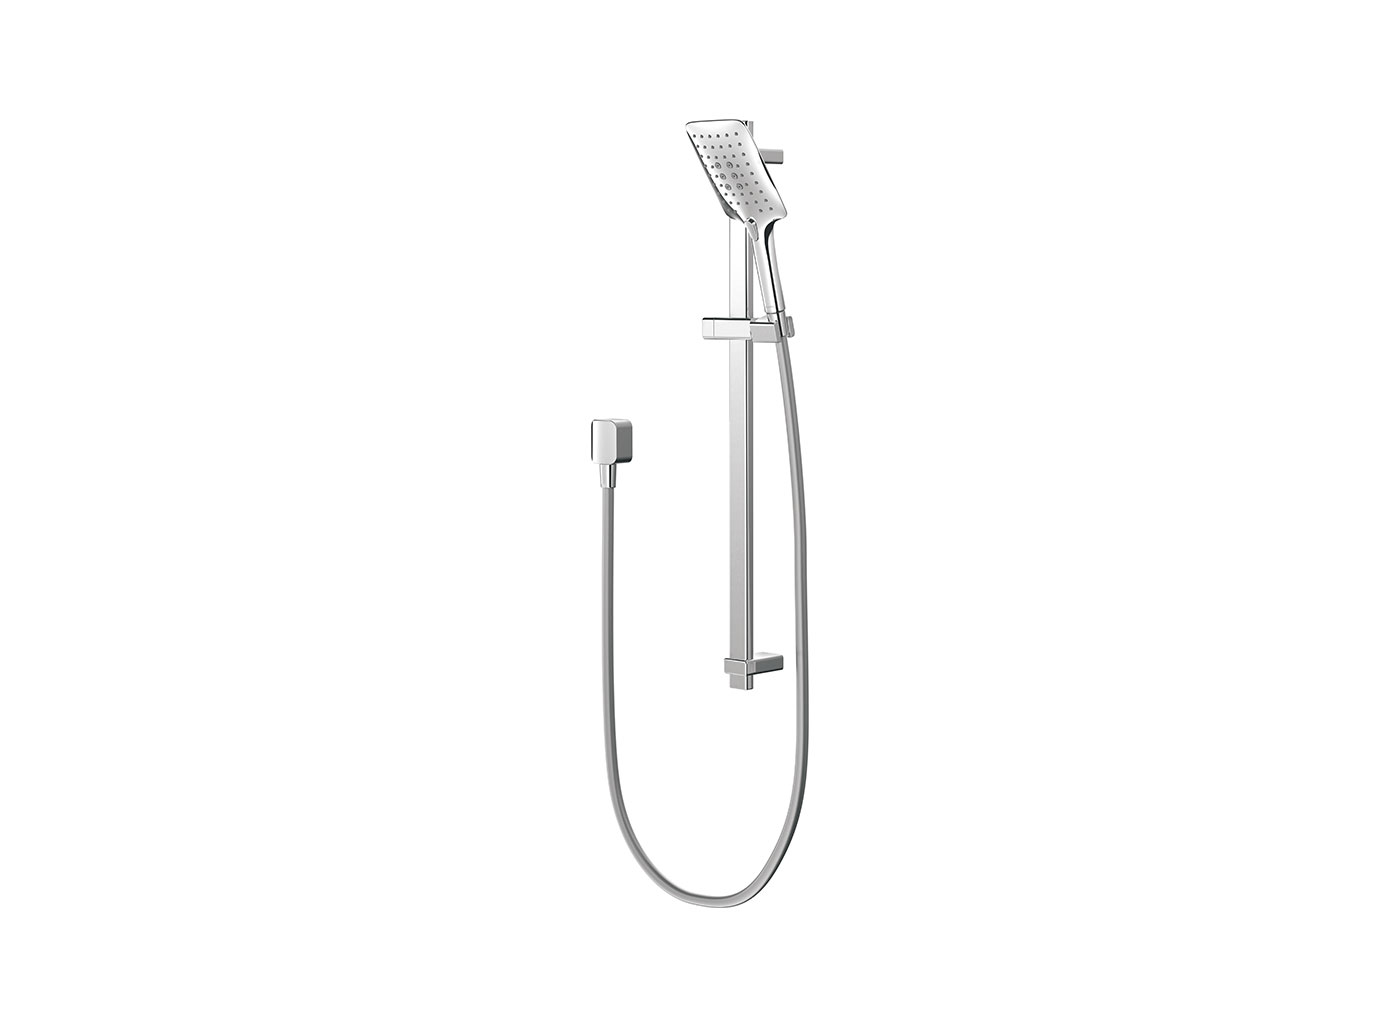 The Easy-Click range allows a seamless transition between shower sprays with the simple click of a button and features a design that marries sought on-trend minimalism and height adjustability with its telescopic rail. A perfect combination to enhance and customize everyone's shower experience.